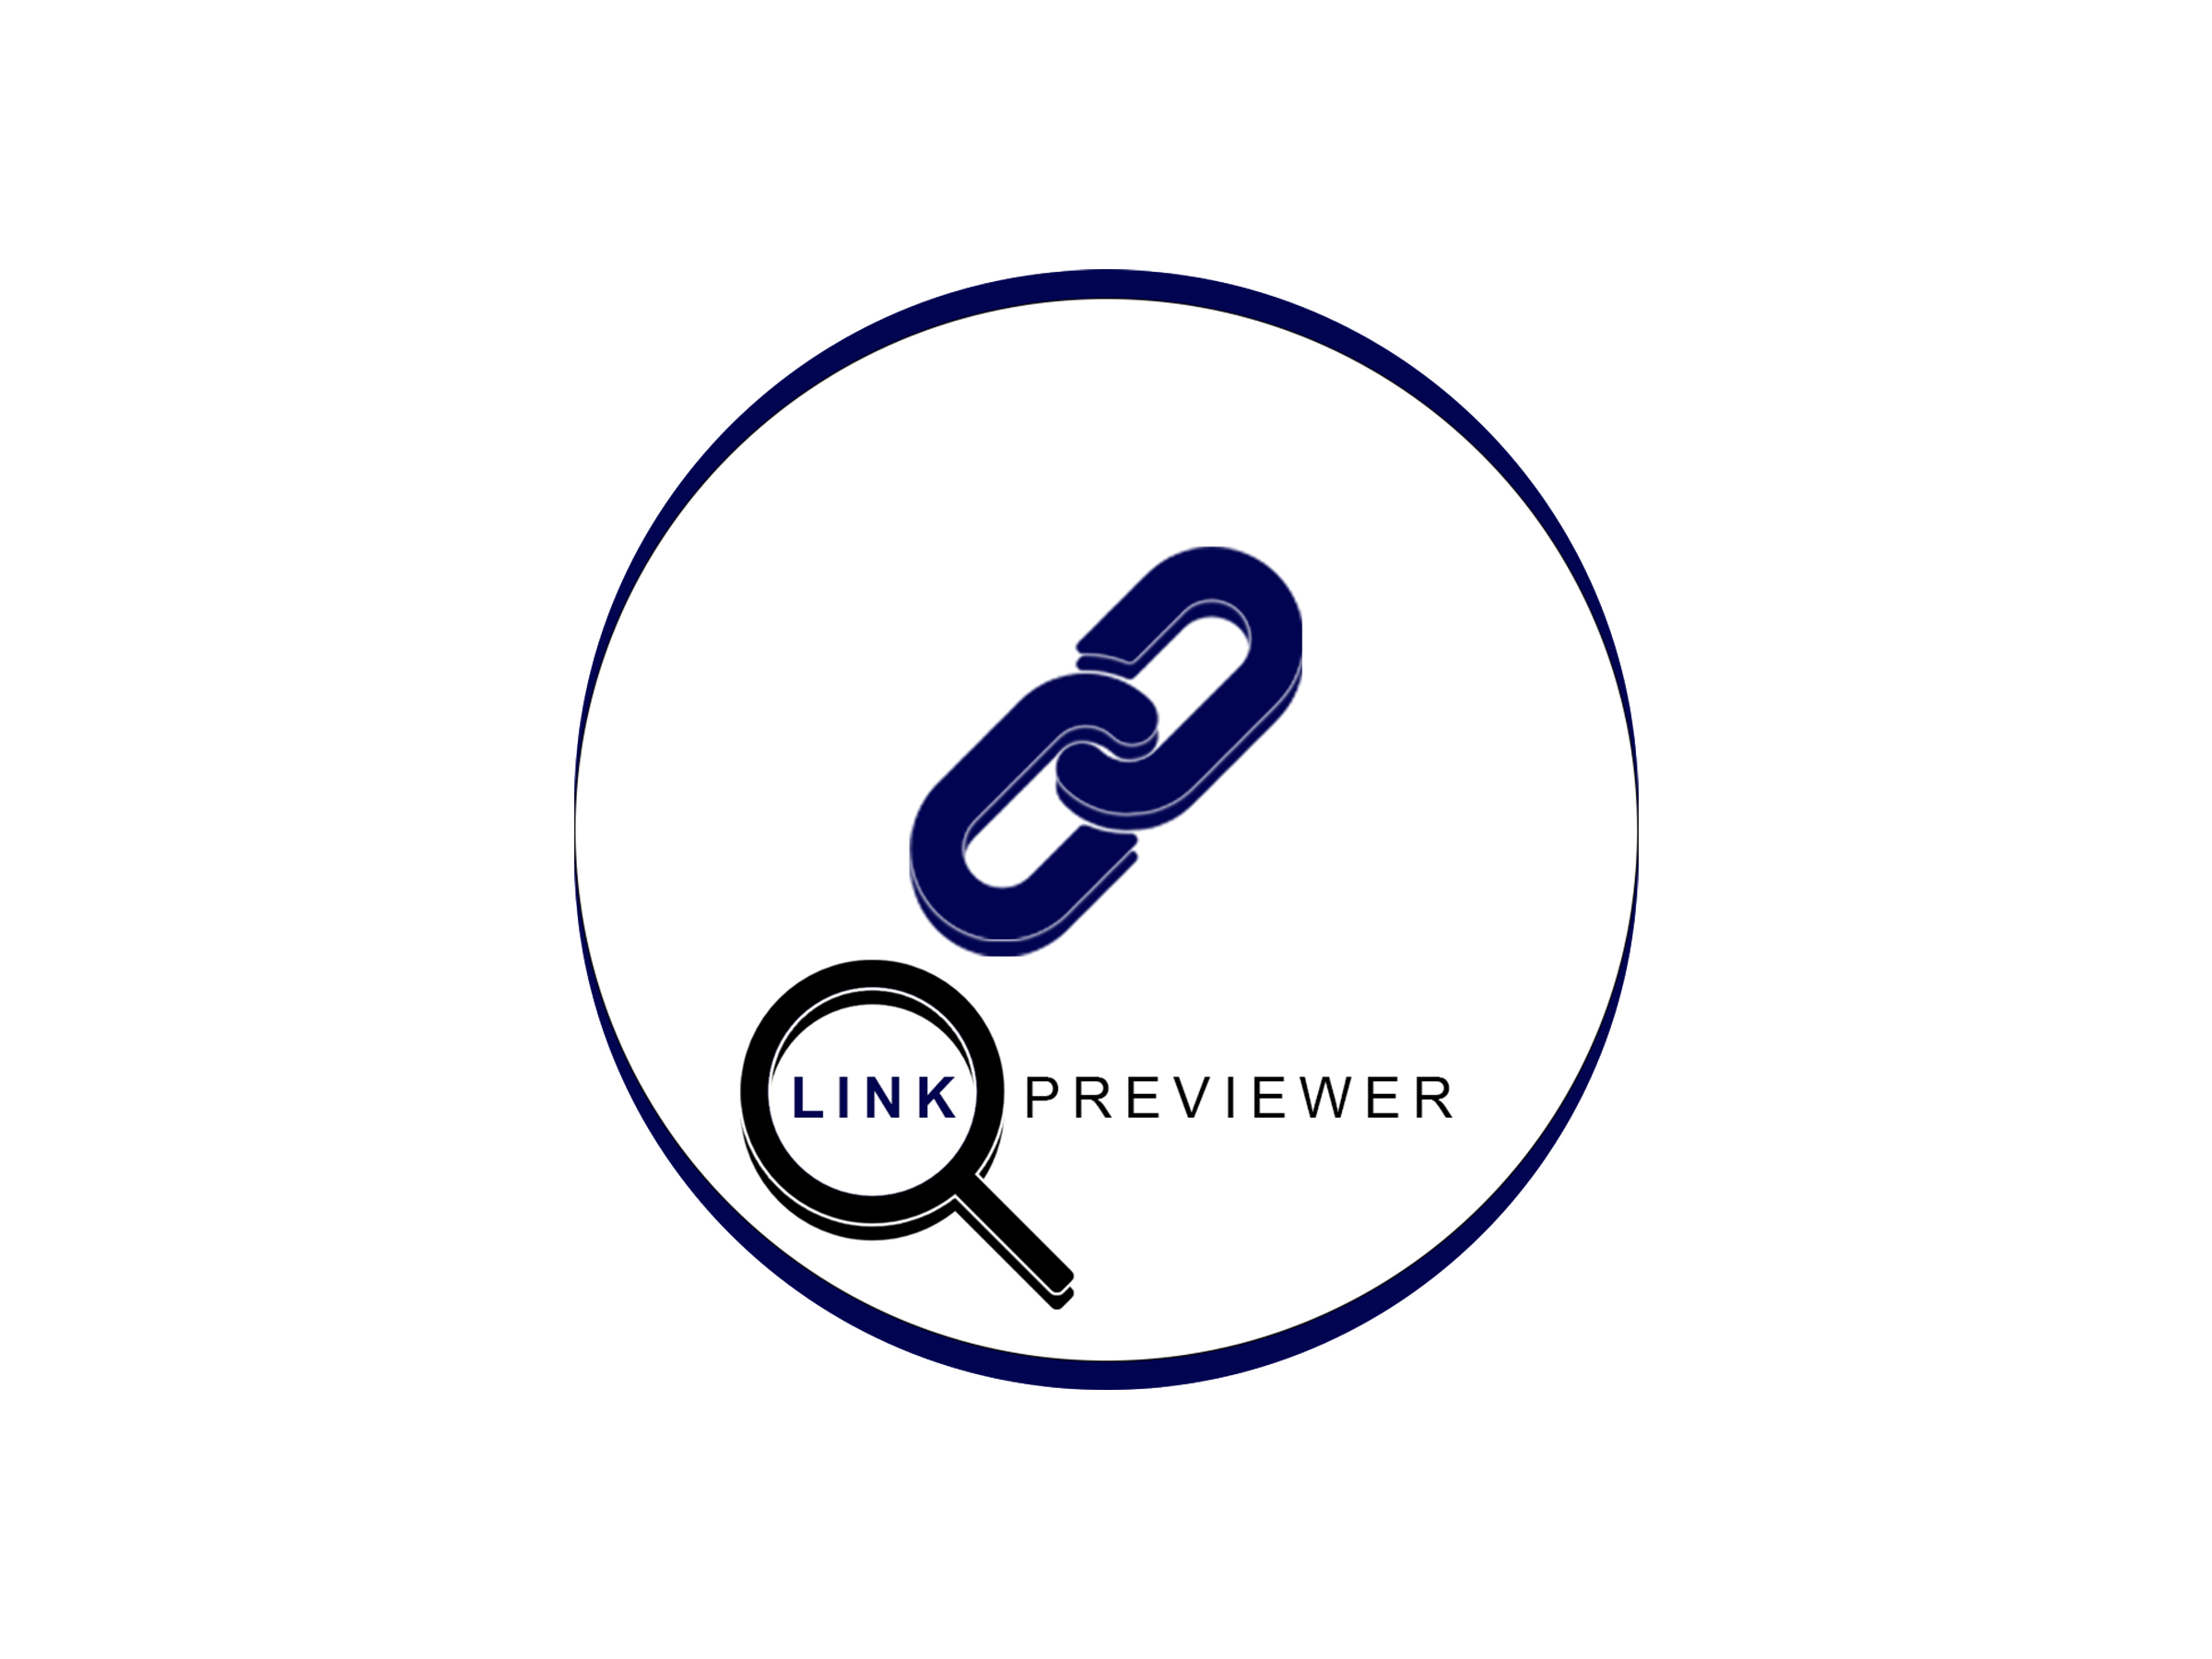 Link Previewer